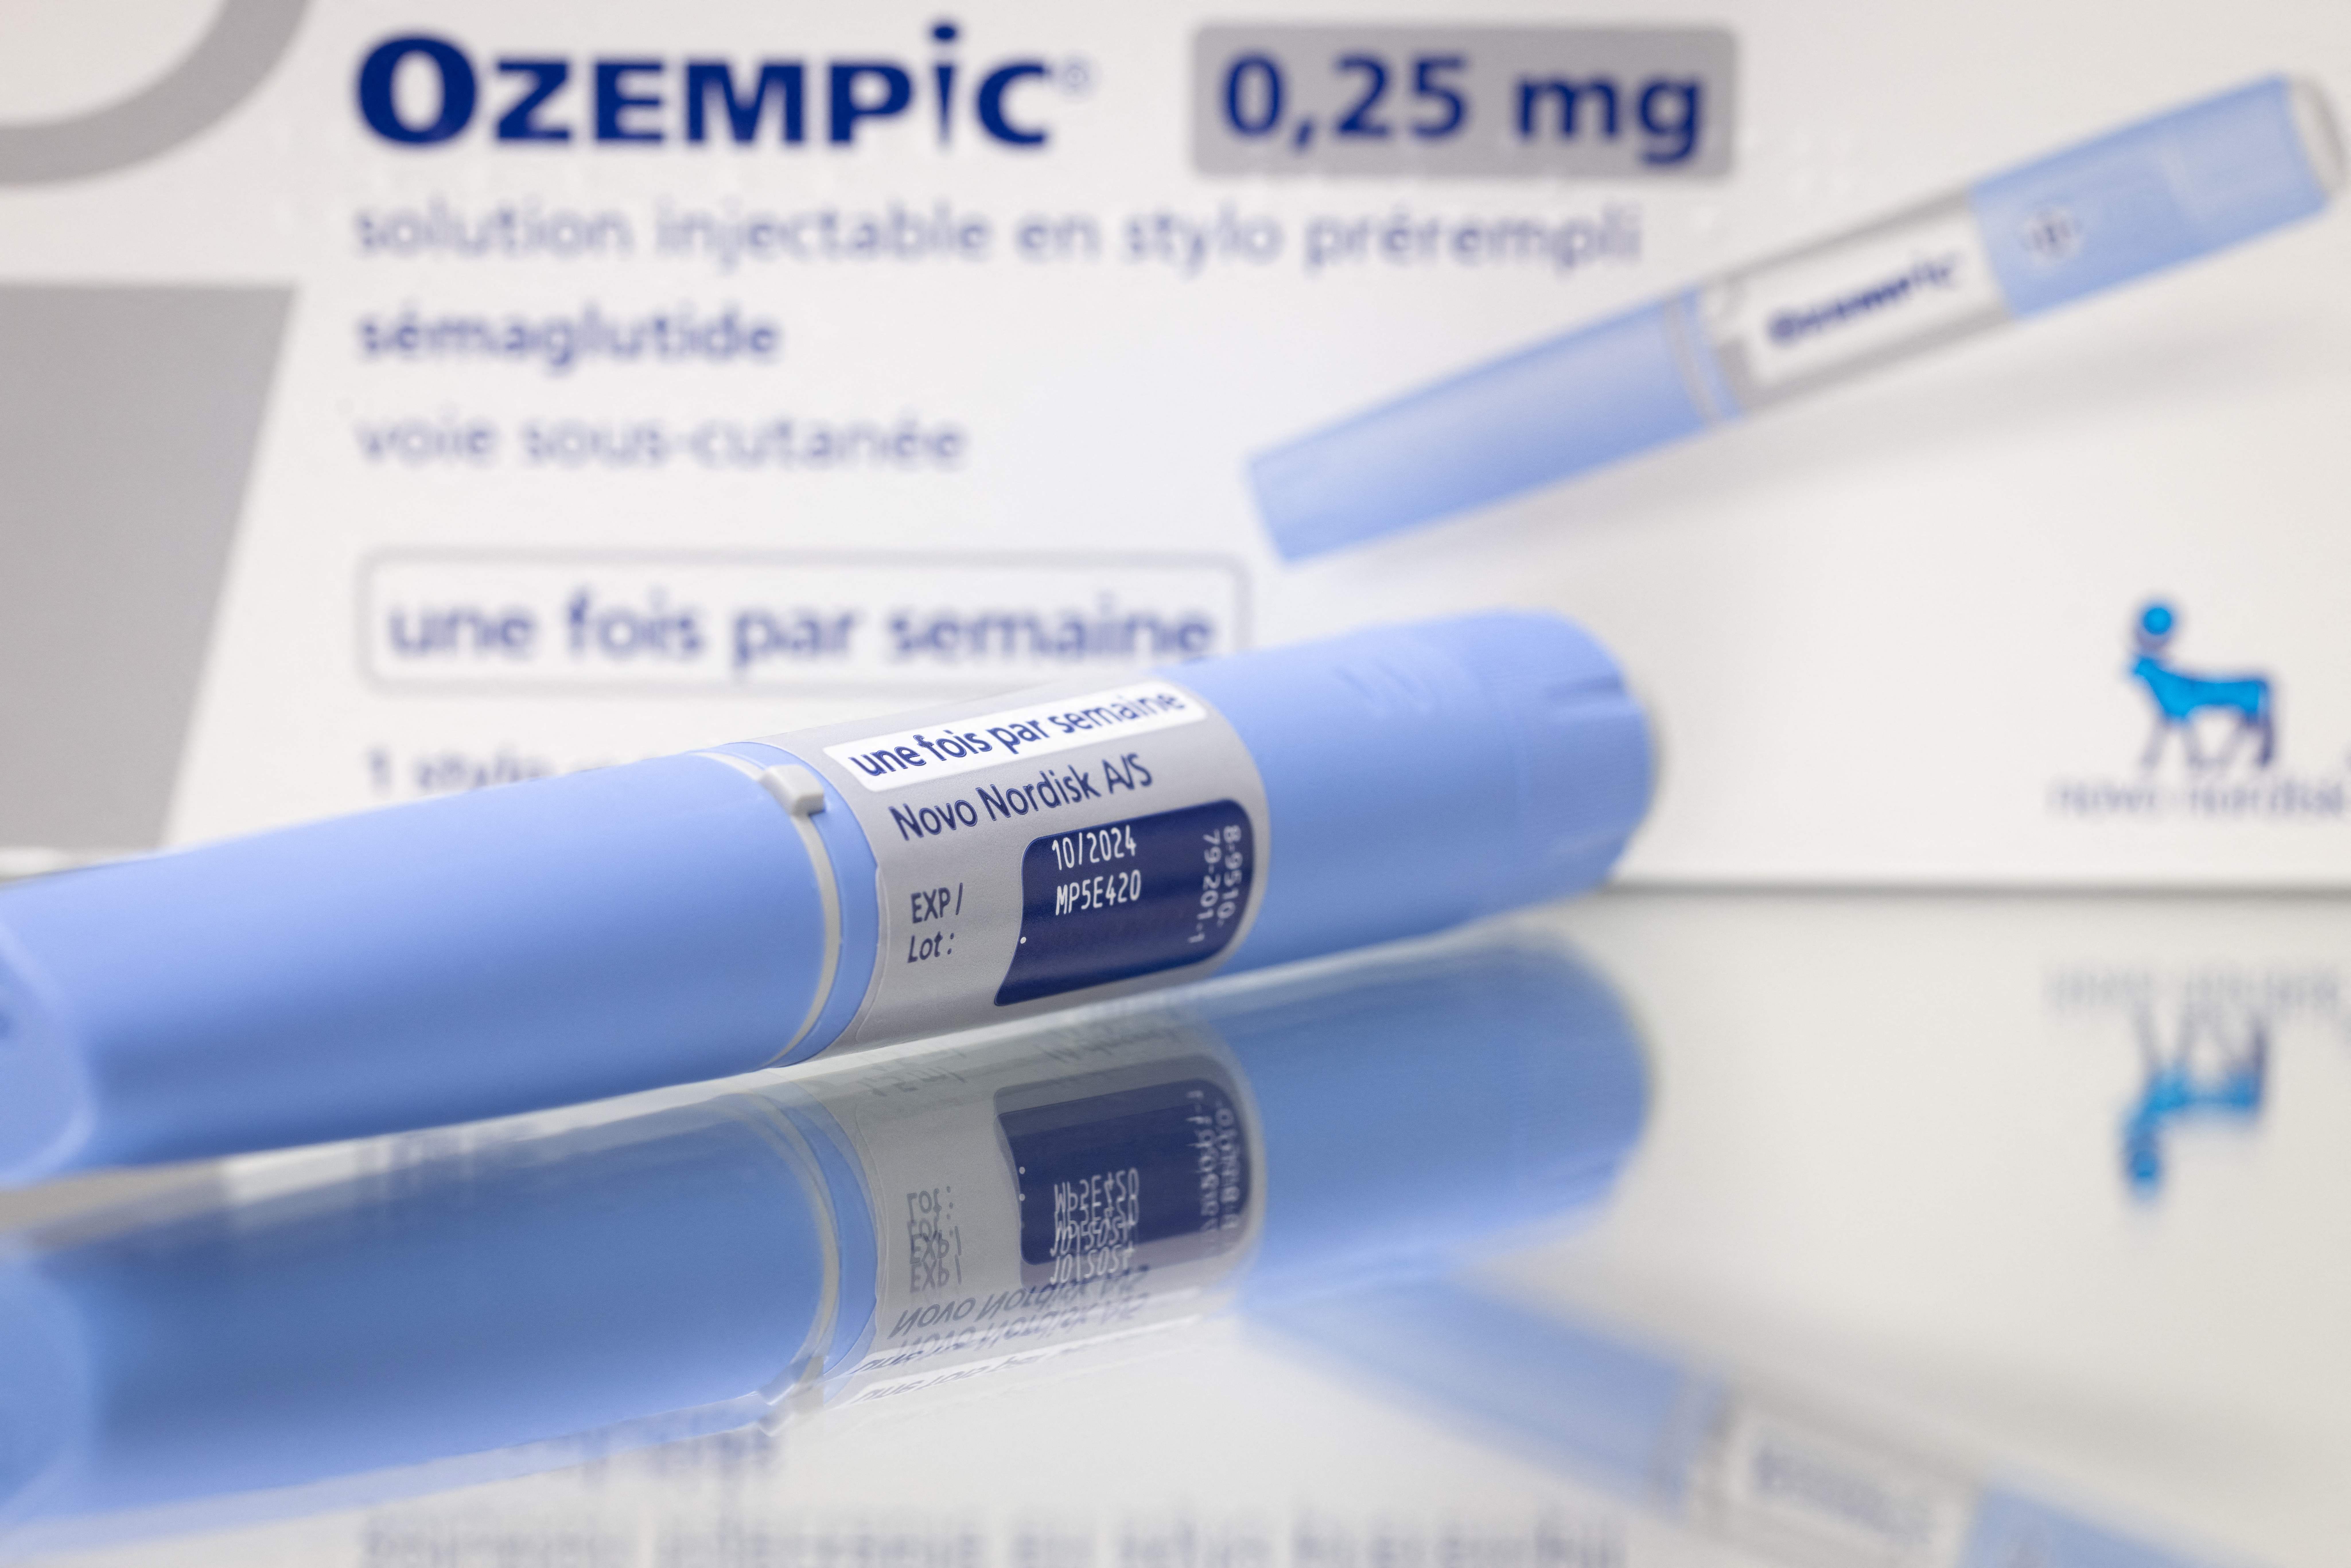 buy ozempic online